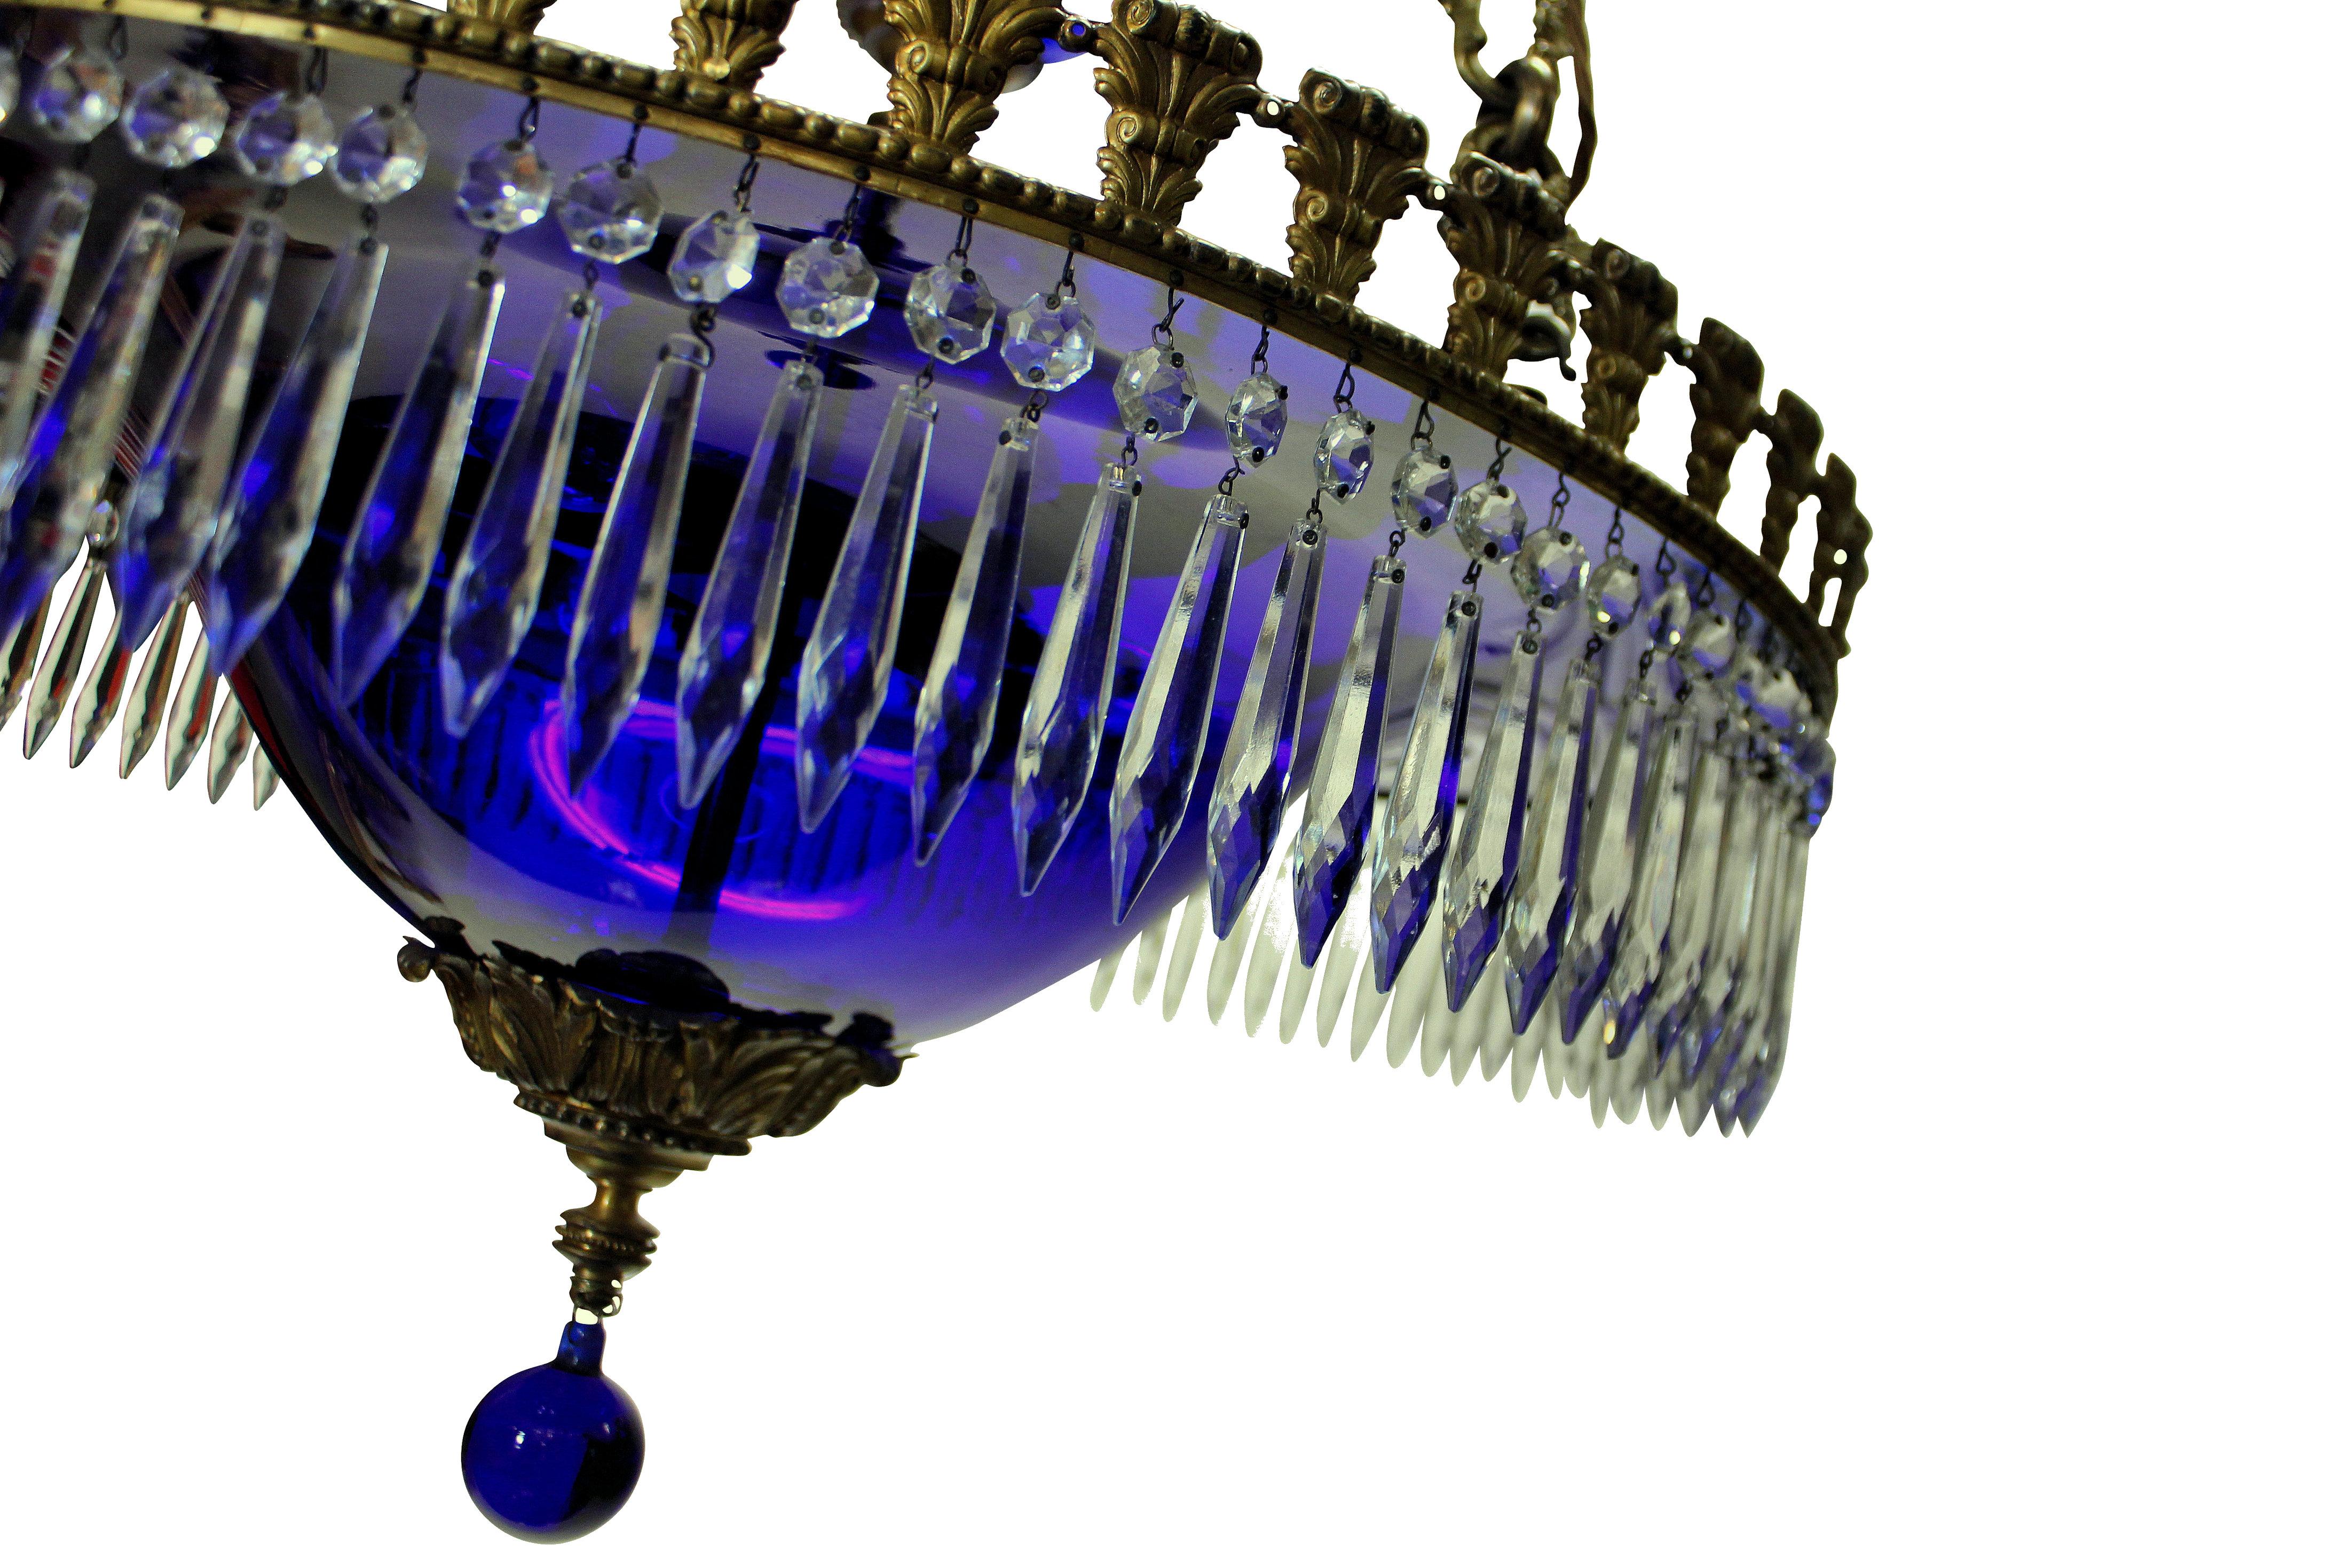 A fine Baltic neoclassical chandelier in blue glass, with gilt bronze frame and hung throughout with cut-glass pendants.